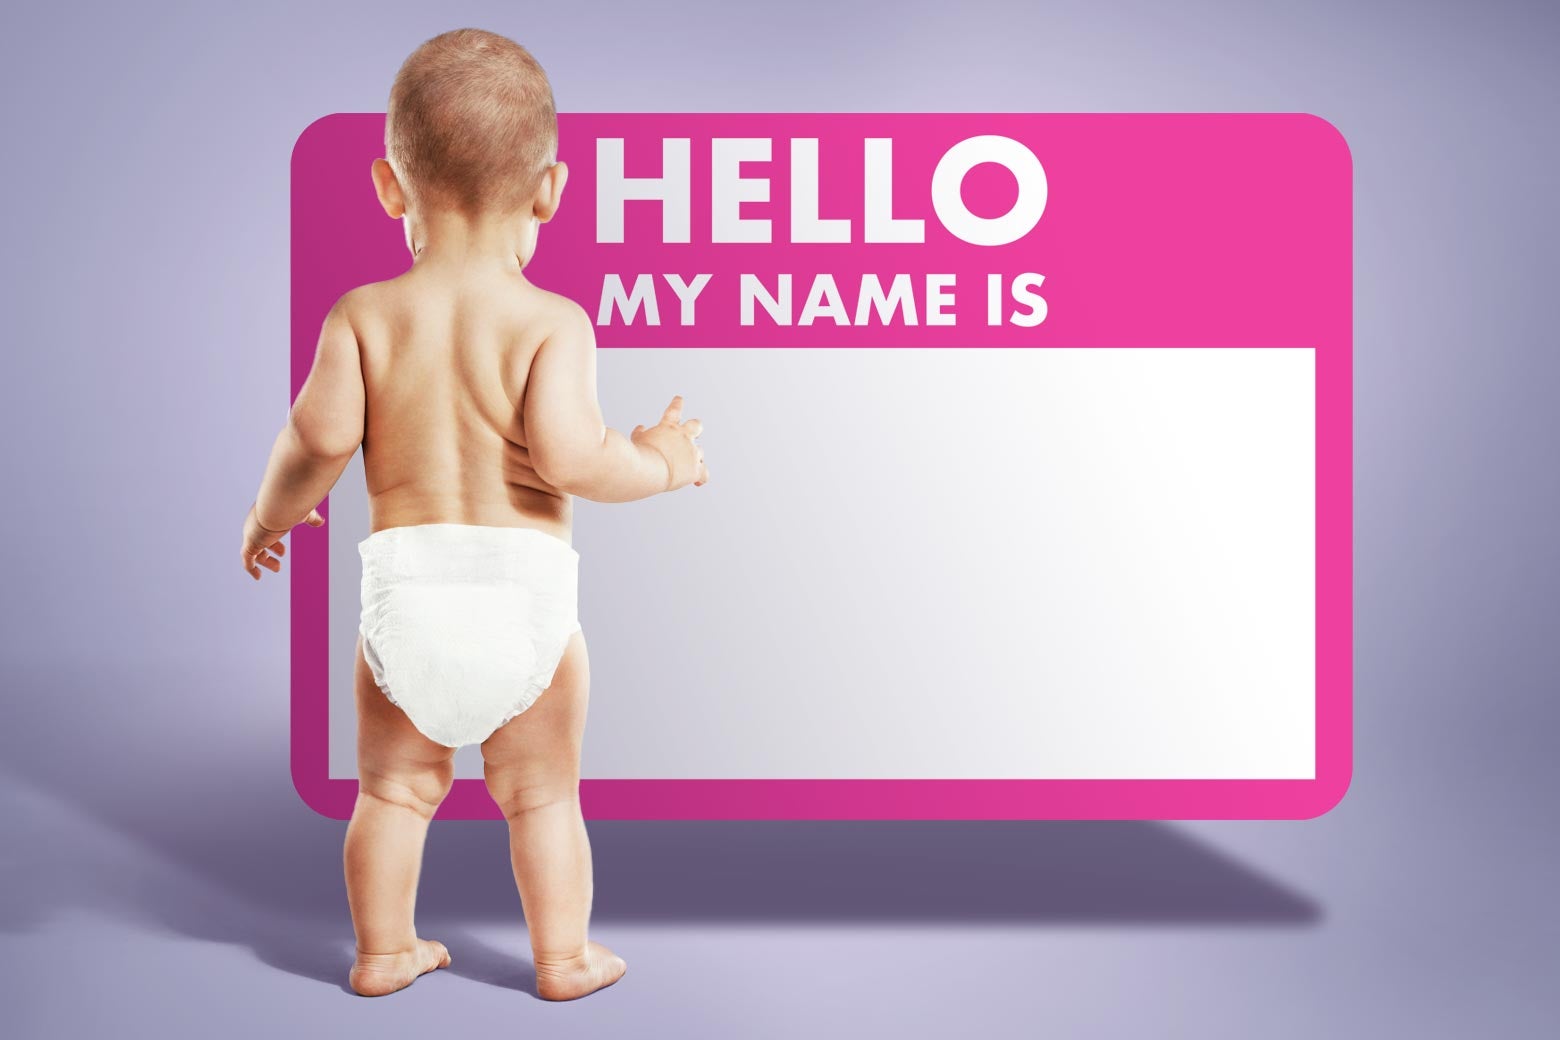 A baby standing by a "Hi, my name is" sticker.